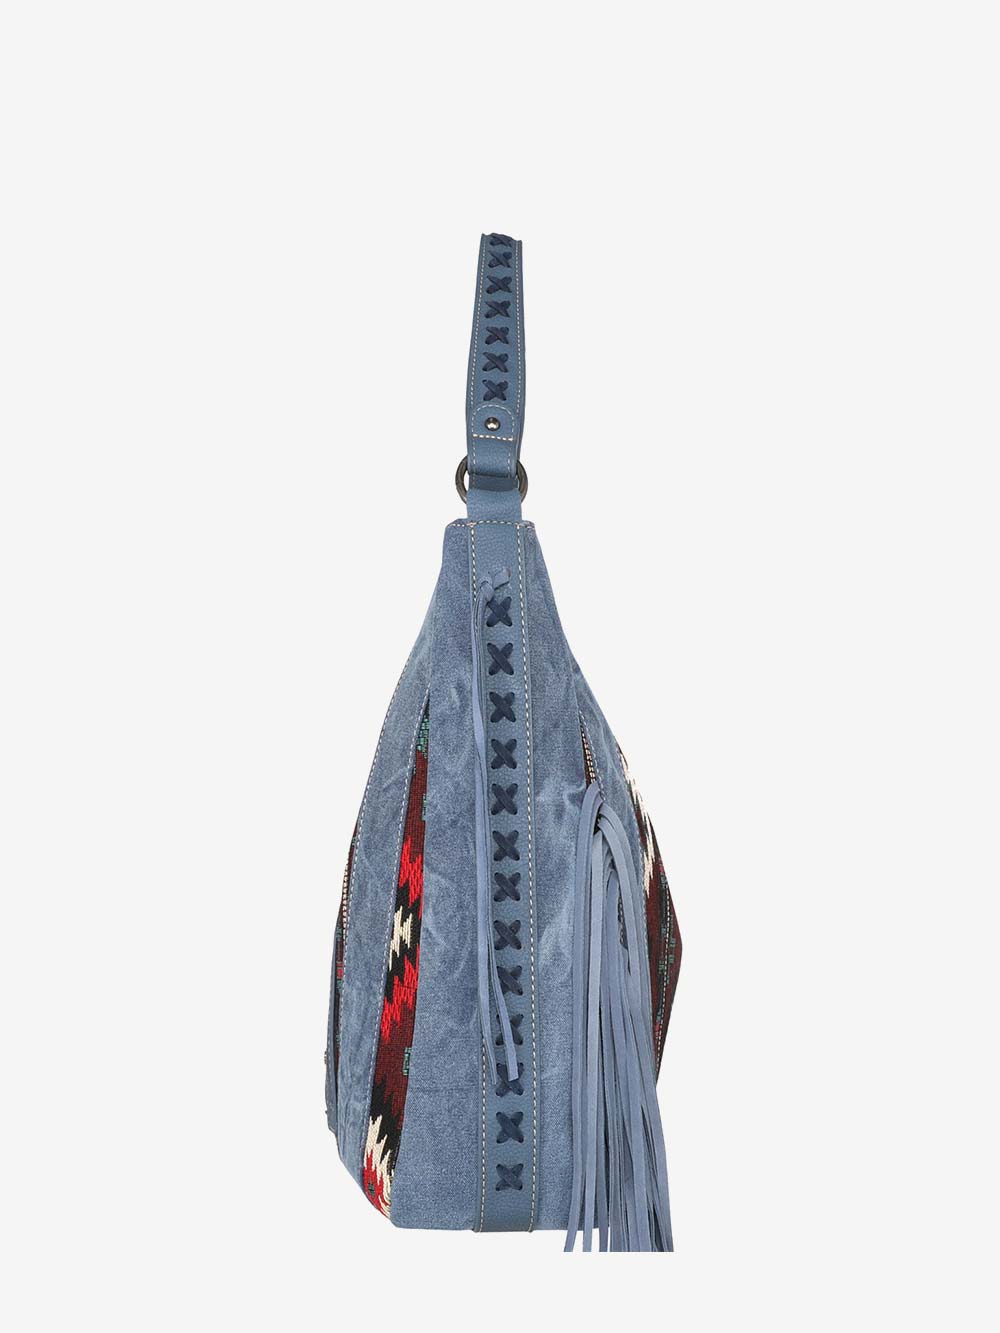 Montana West Aztec Tapestry Concealed Carry Hobo - Montana West World